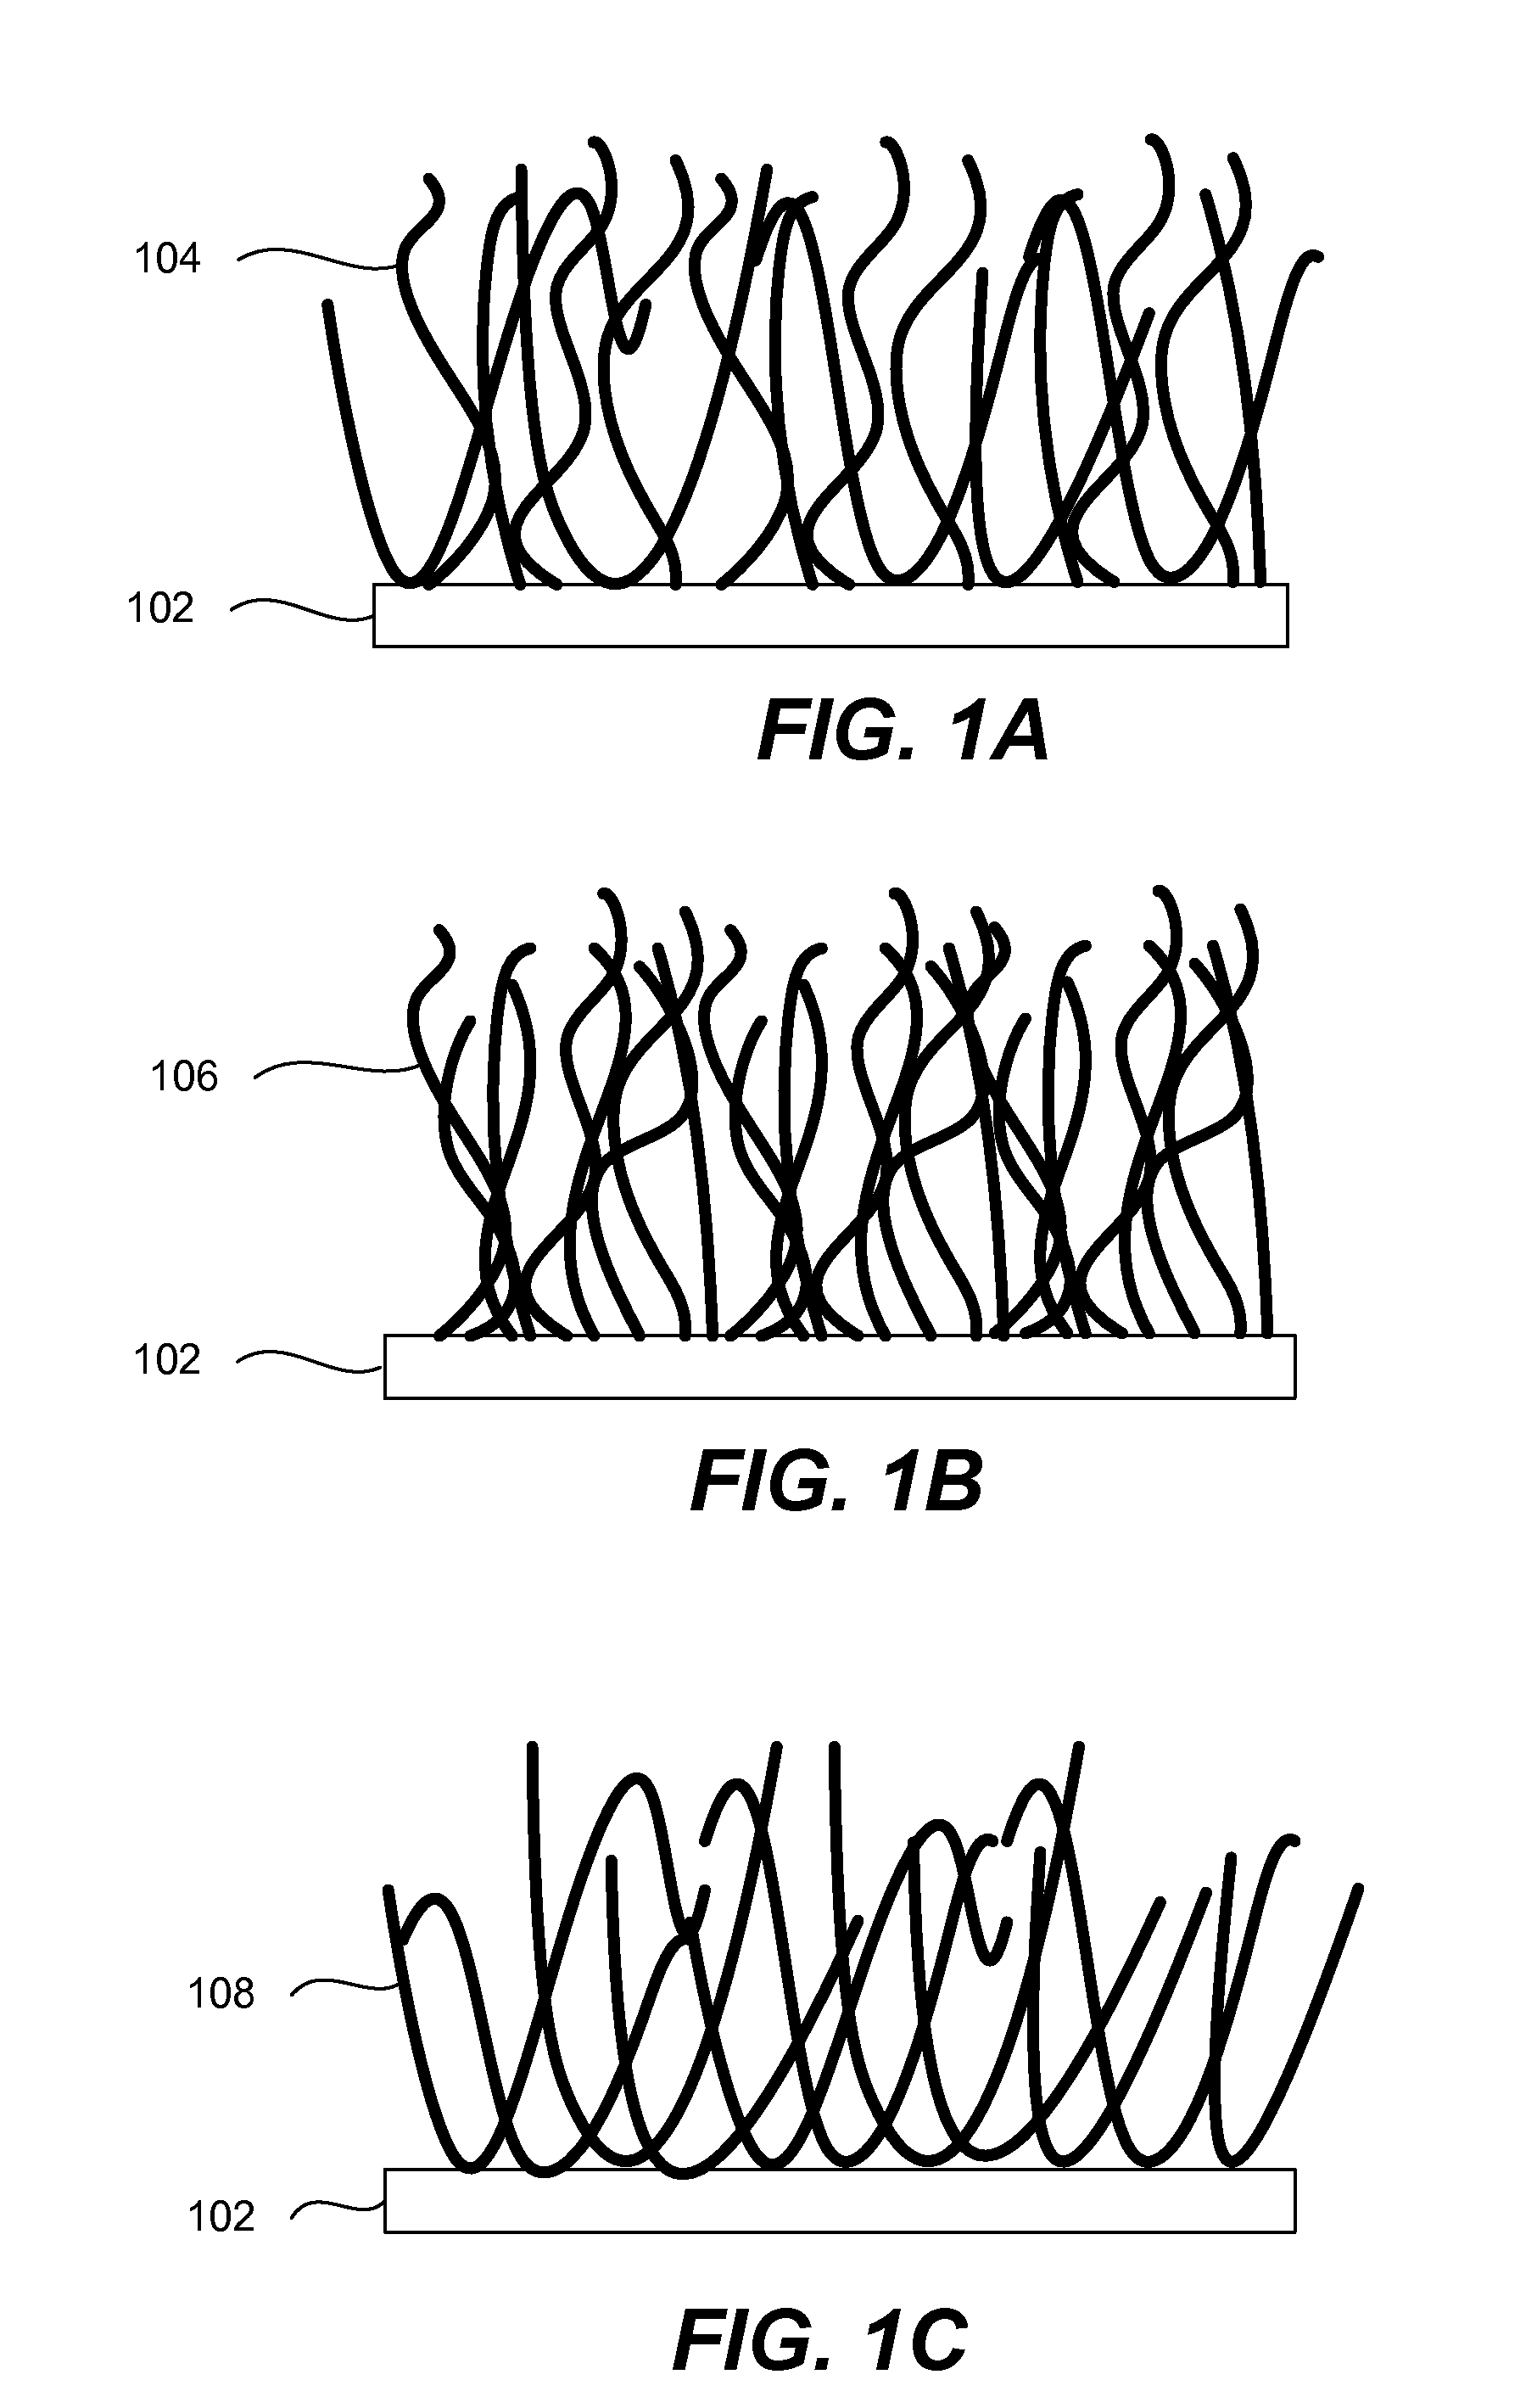 Electrode including nanostructures for rechargeable cells